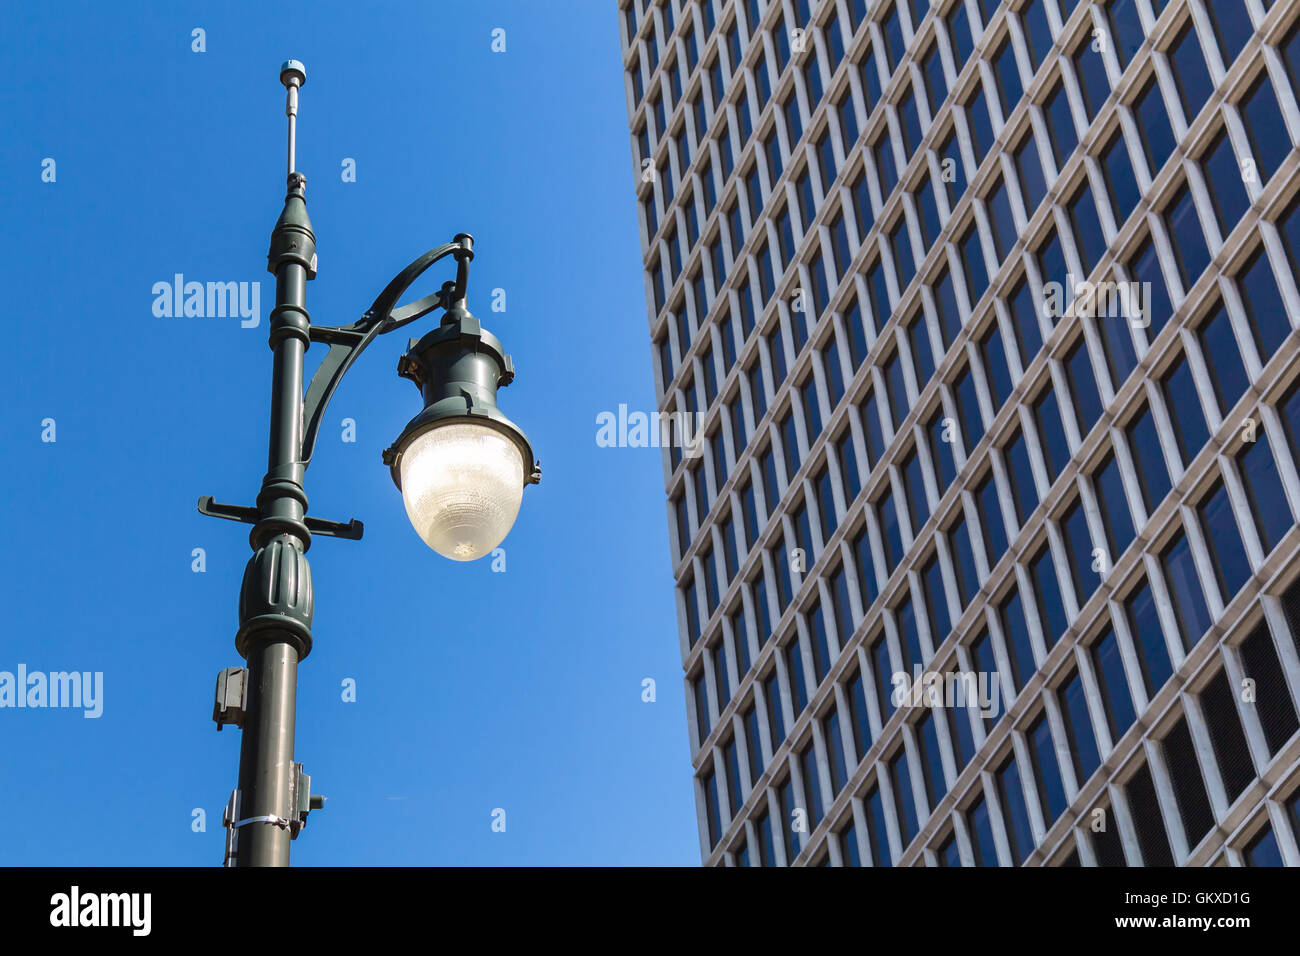 Old design of a street lamp, which is still on in spite of the blue sky day. Detail of a skyscraper. Downtown Detroit, Michigan, Stock Photo